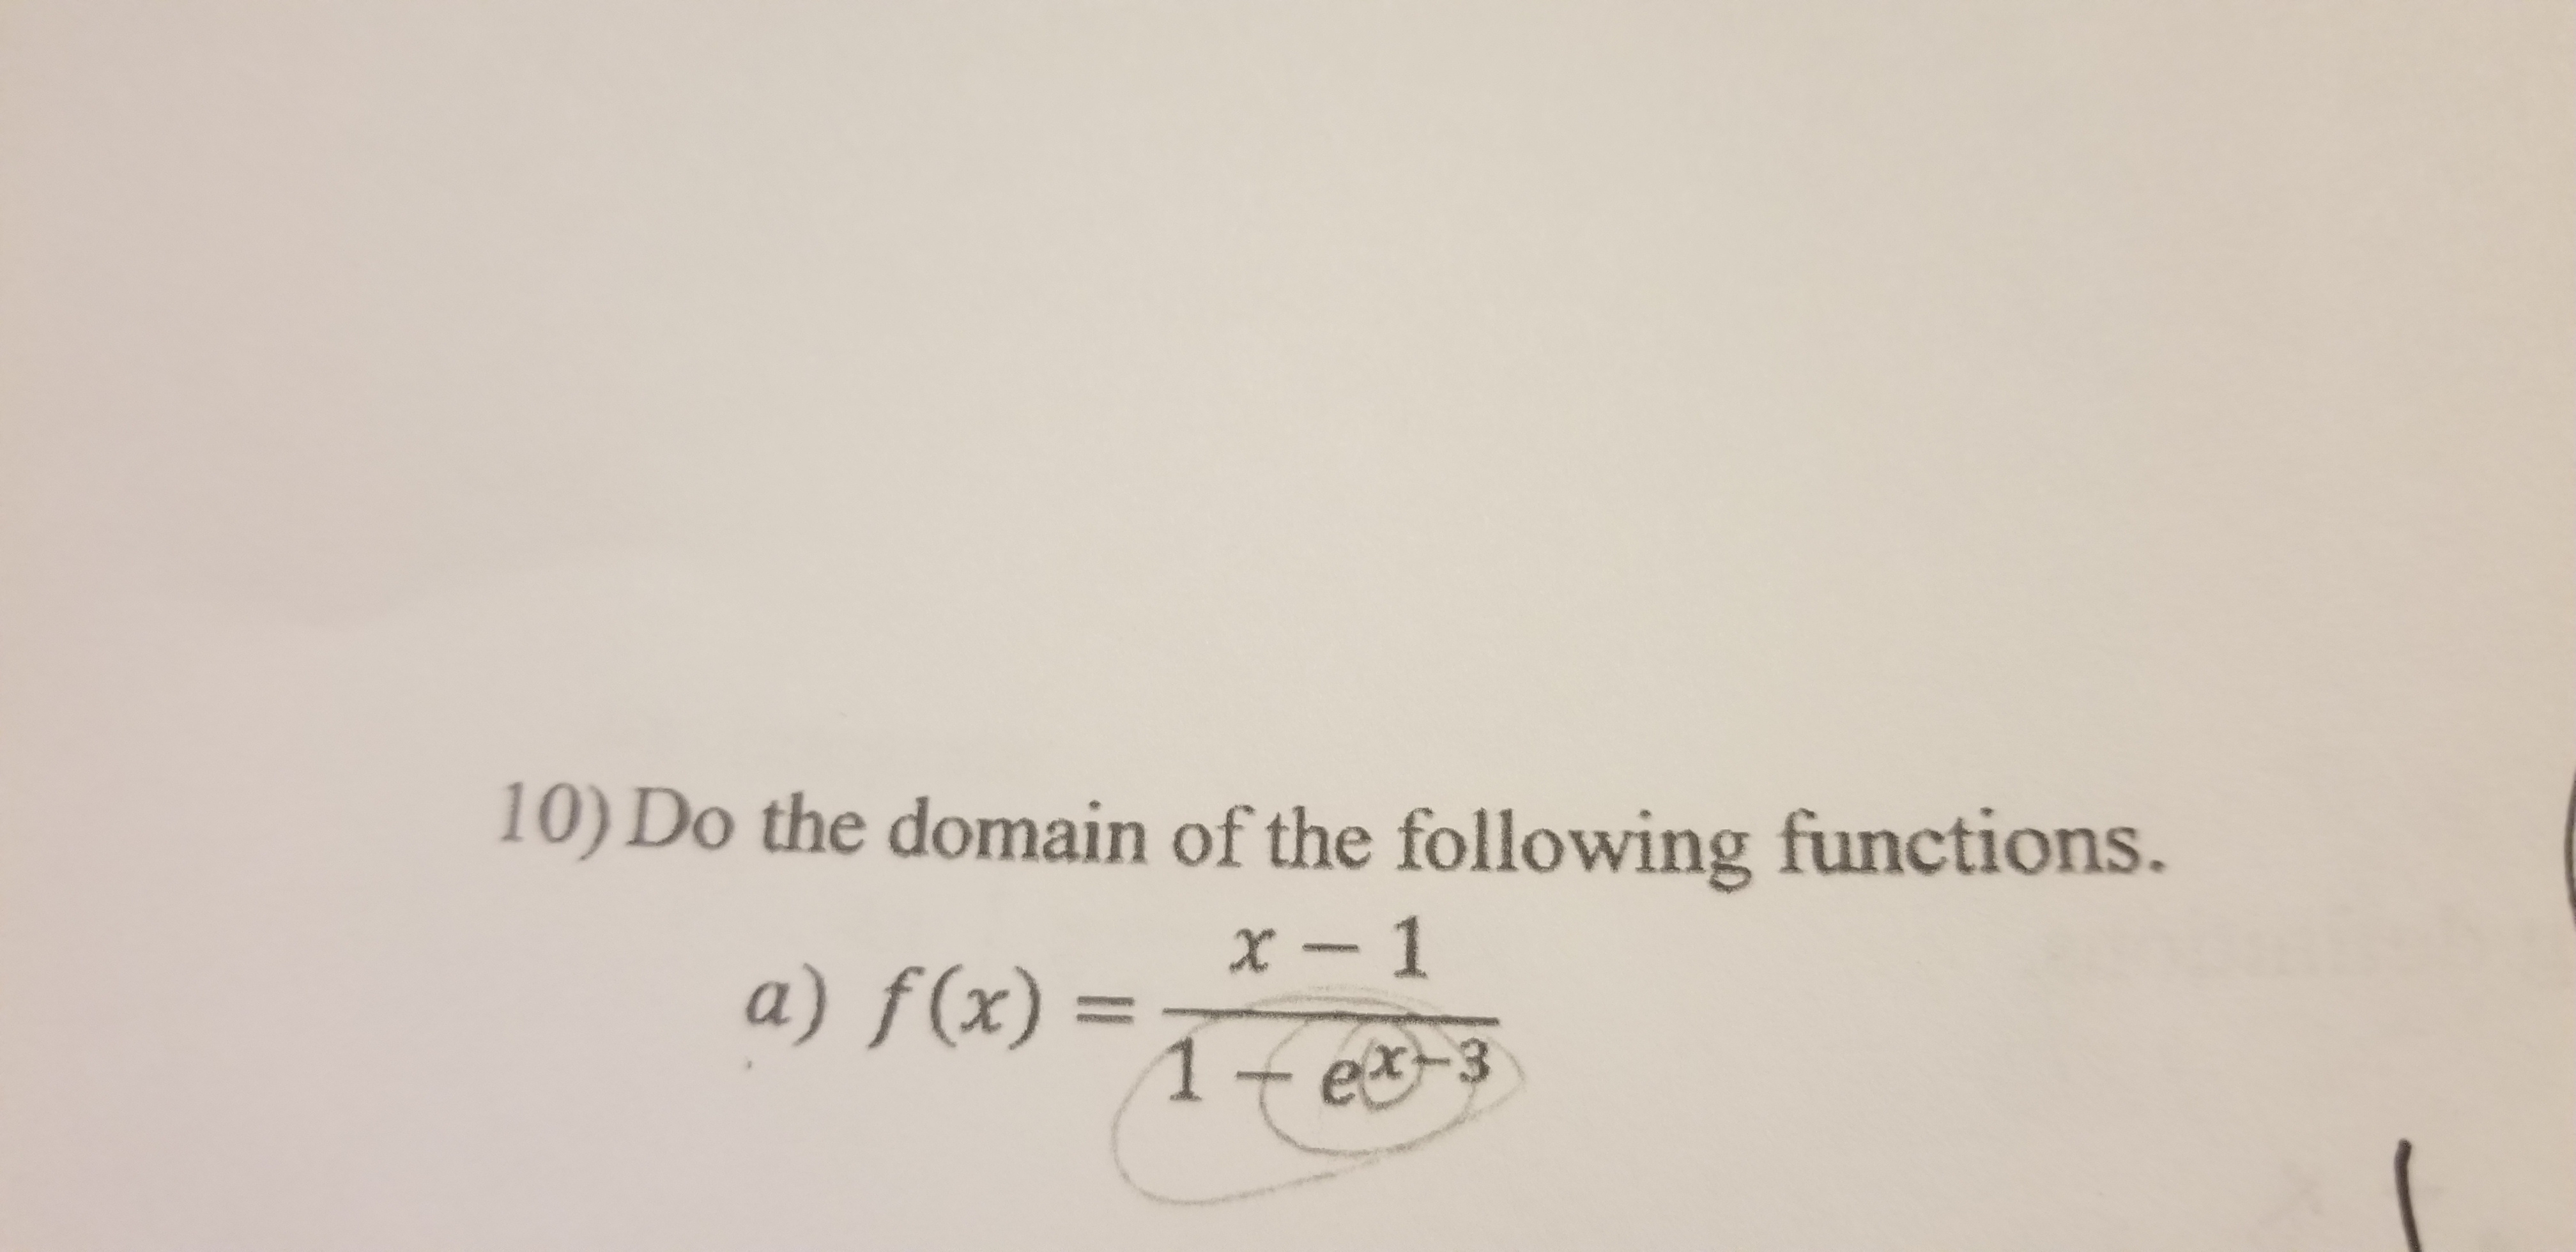 10) Do the domain of the following functions.
X-1
a) f(x)=es
1 -e&-3
